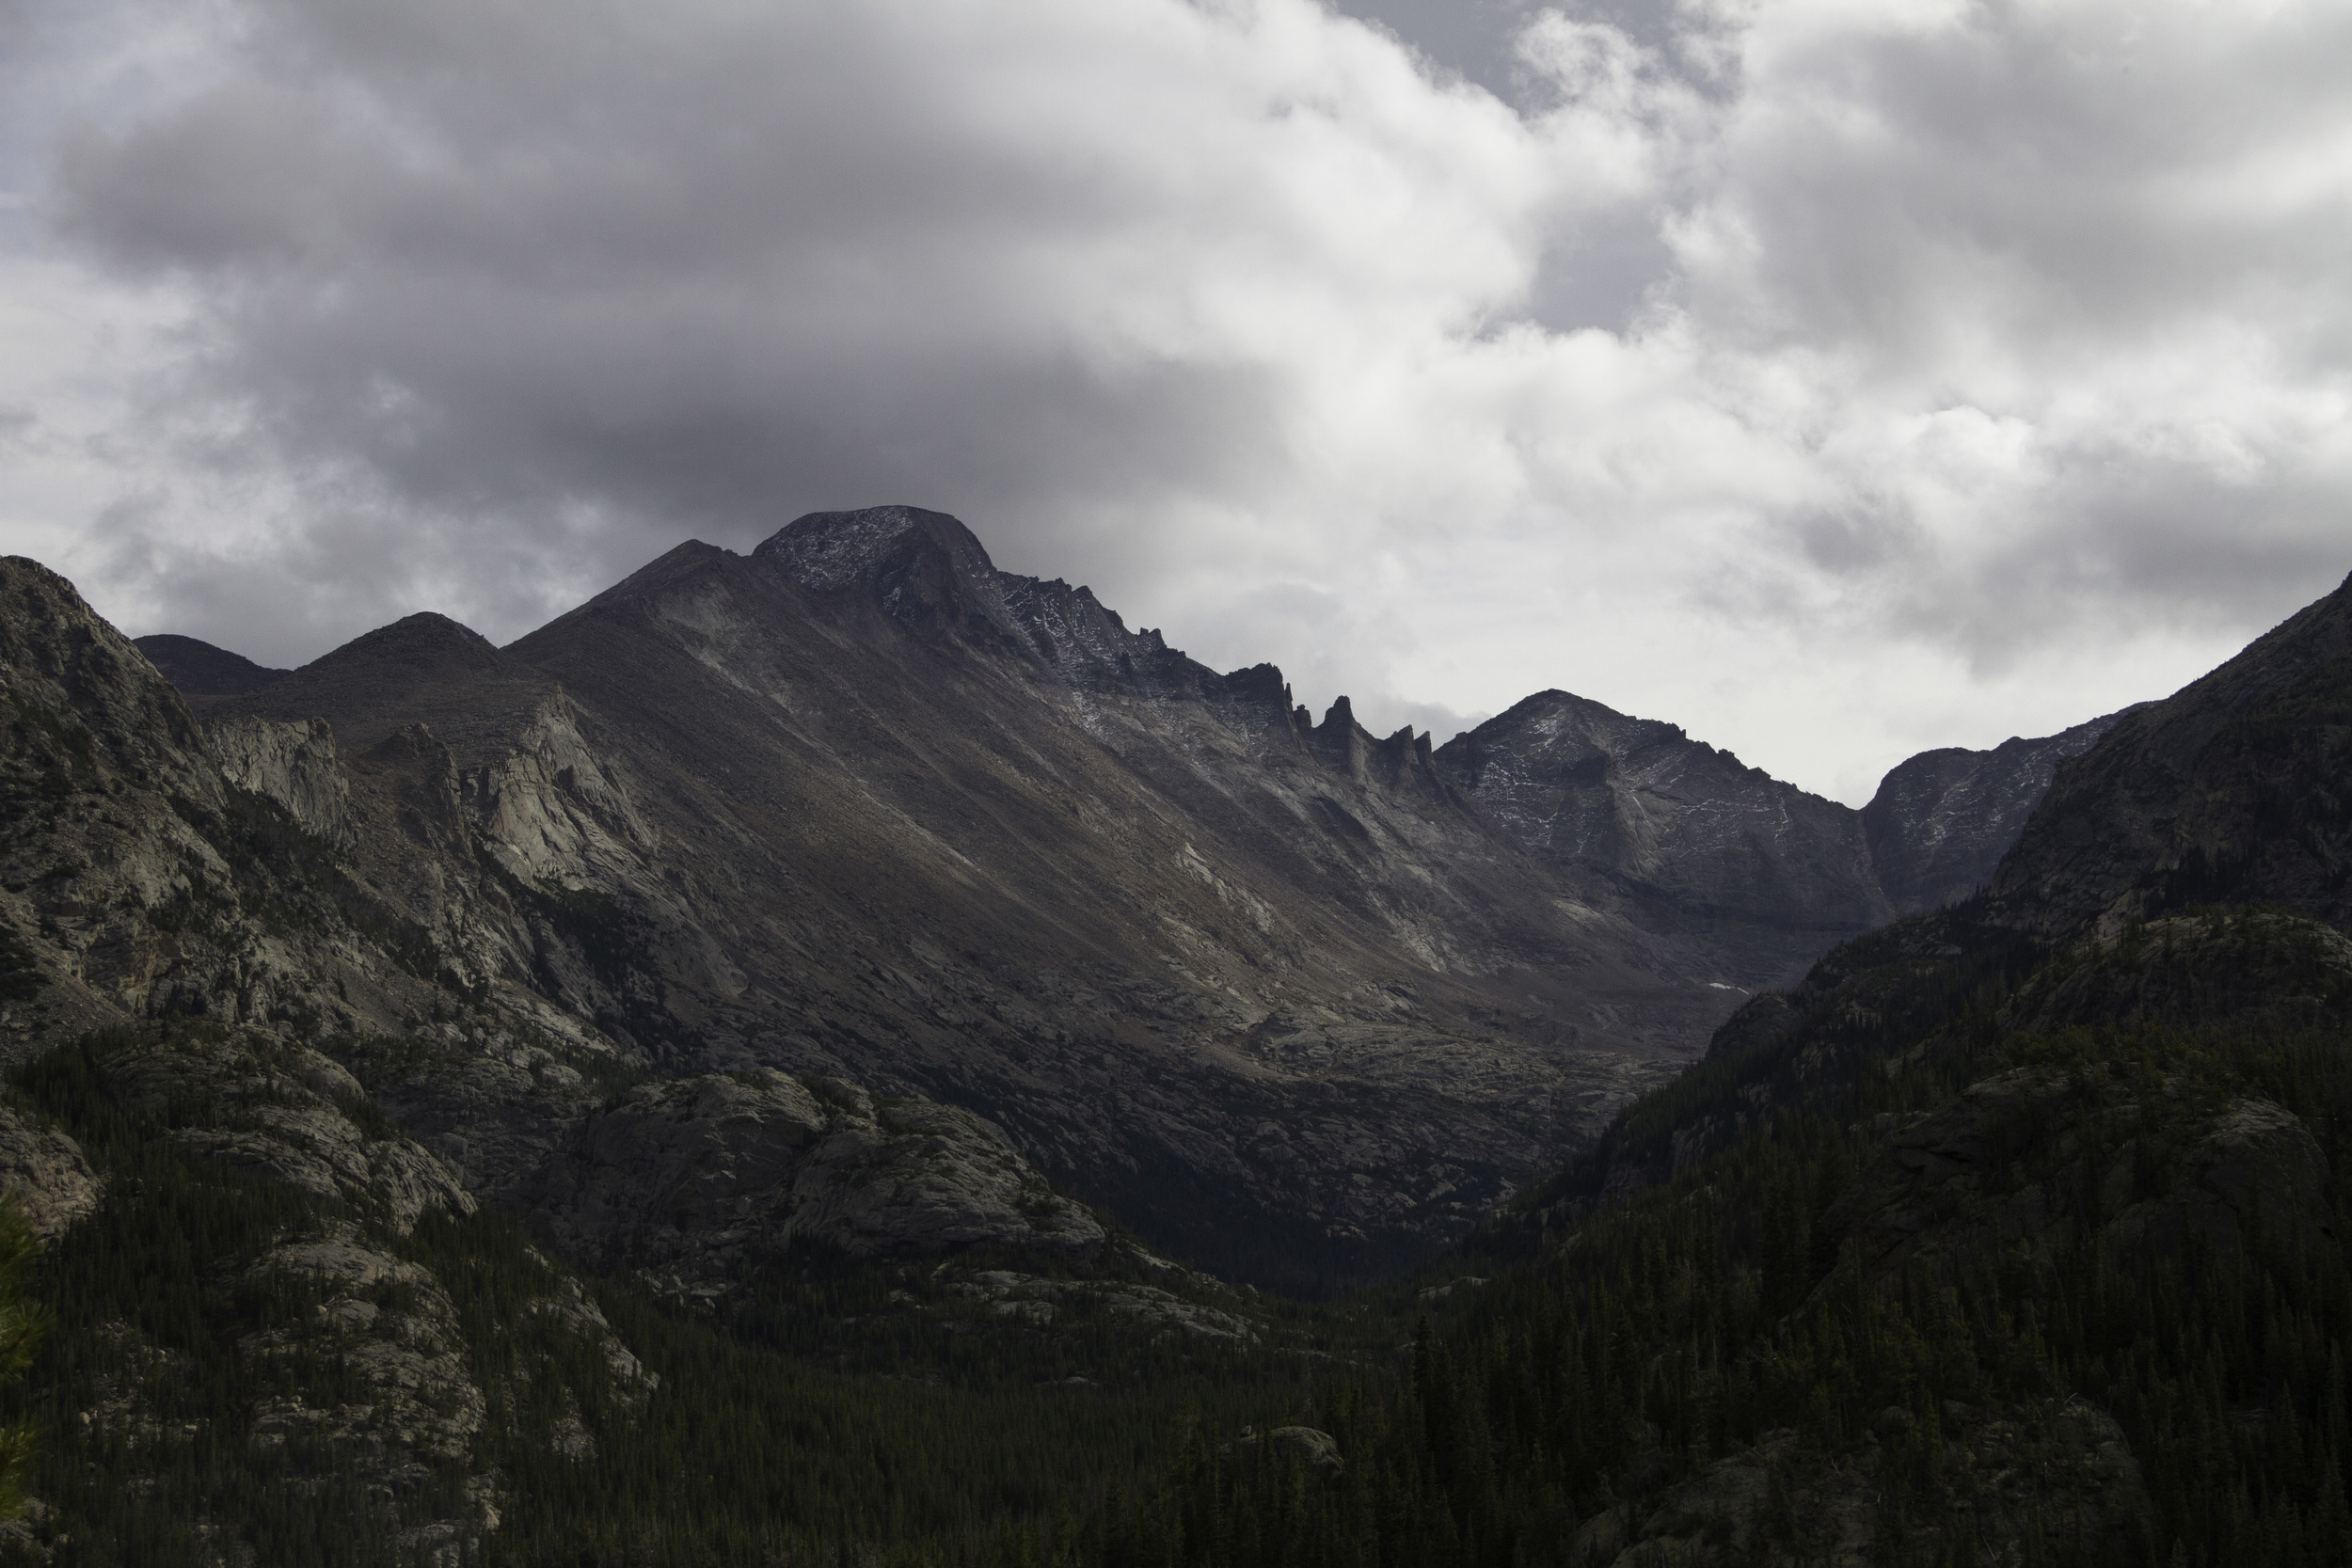 Longs Peak and Keyboard of the Winds, Rocky Mountain National Park, CO - 2015